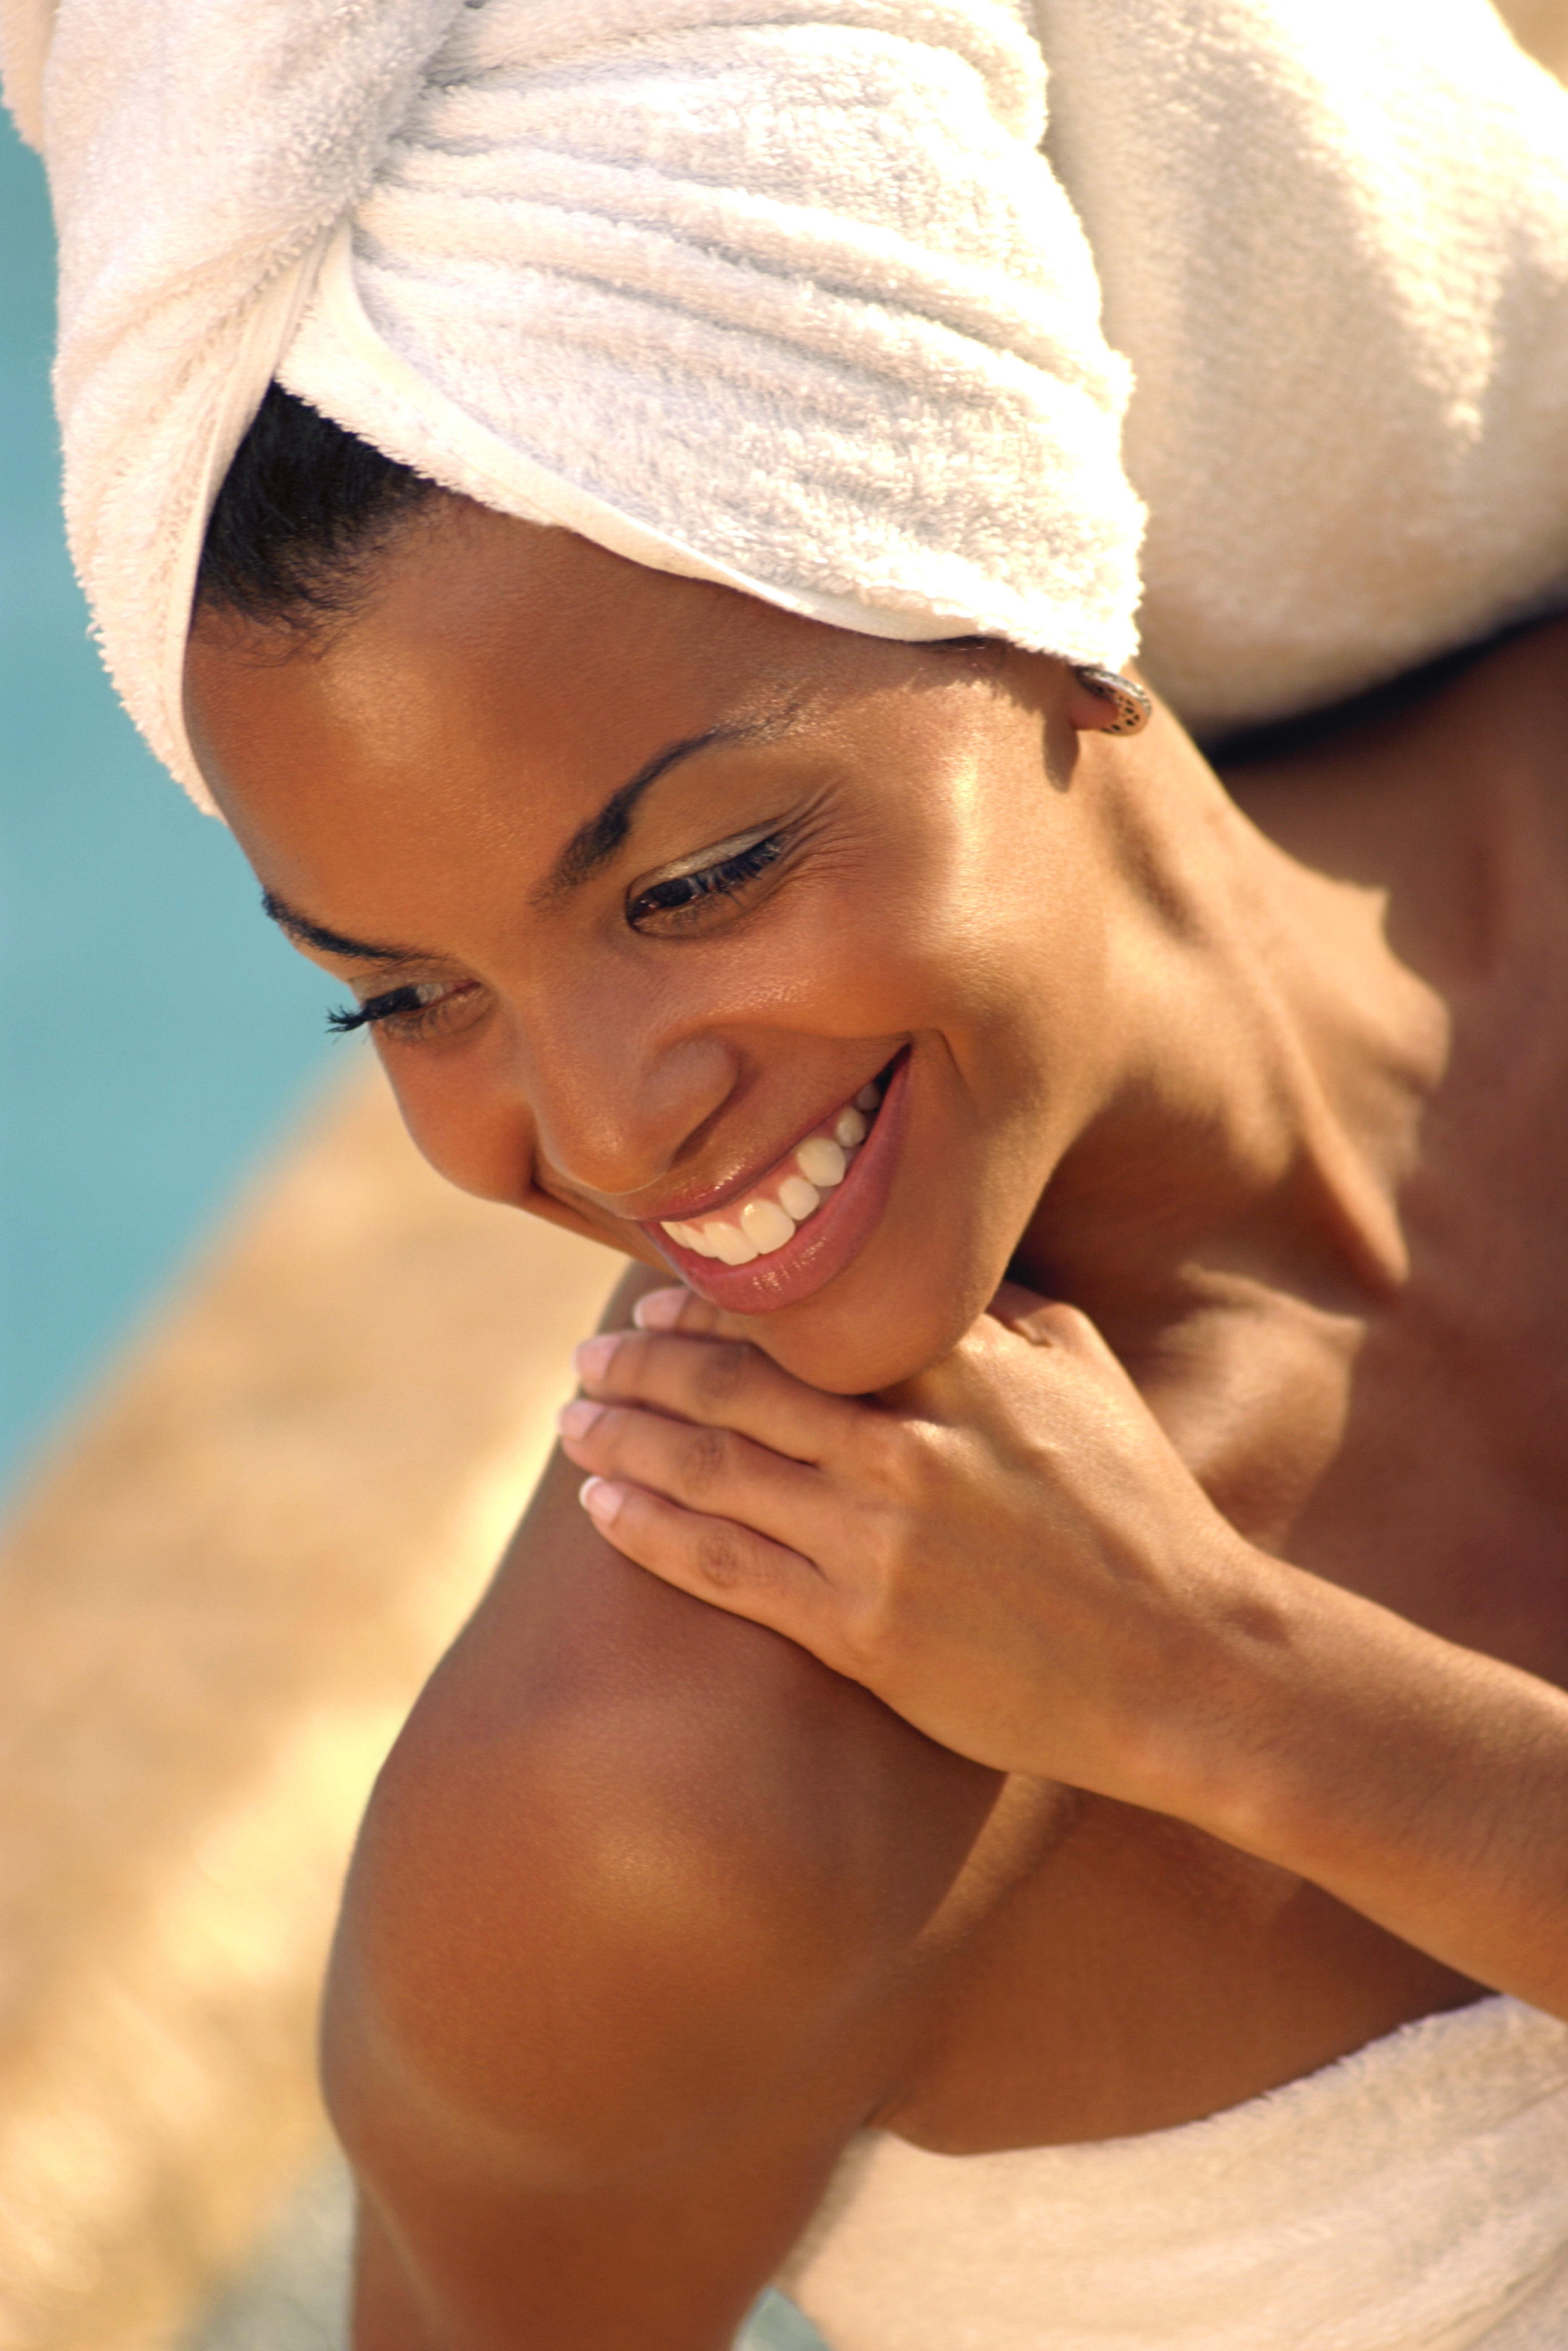 Close-up looking down on a smiling woman with towels wrapped around her hair and body and her hand on her shoulder.